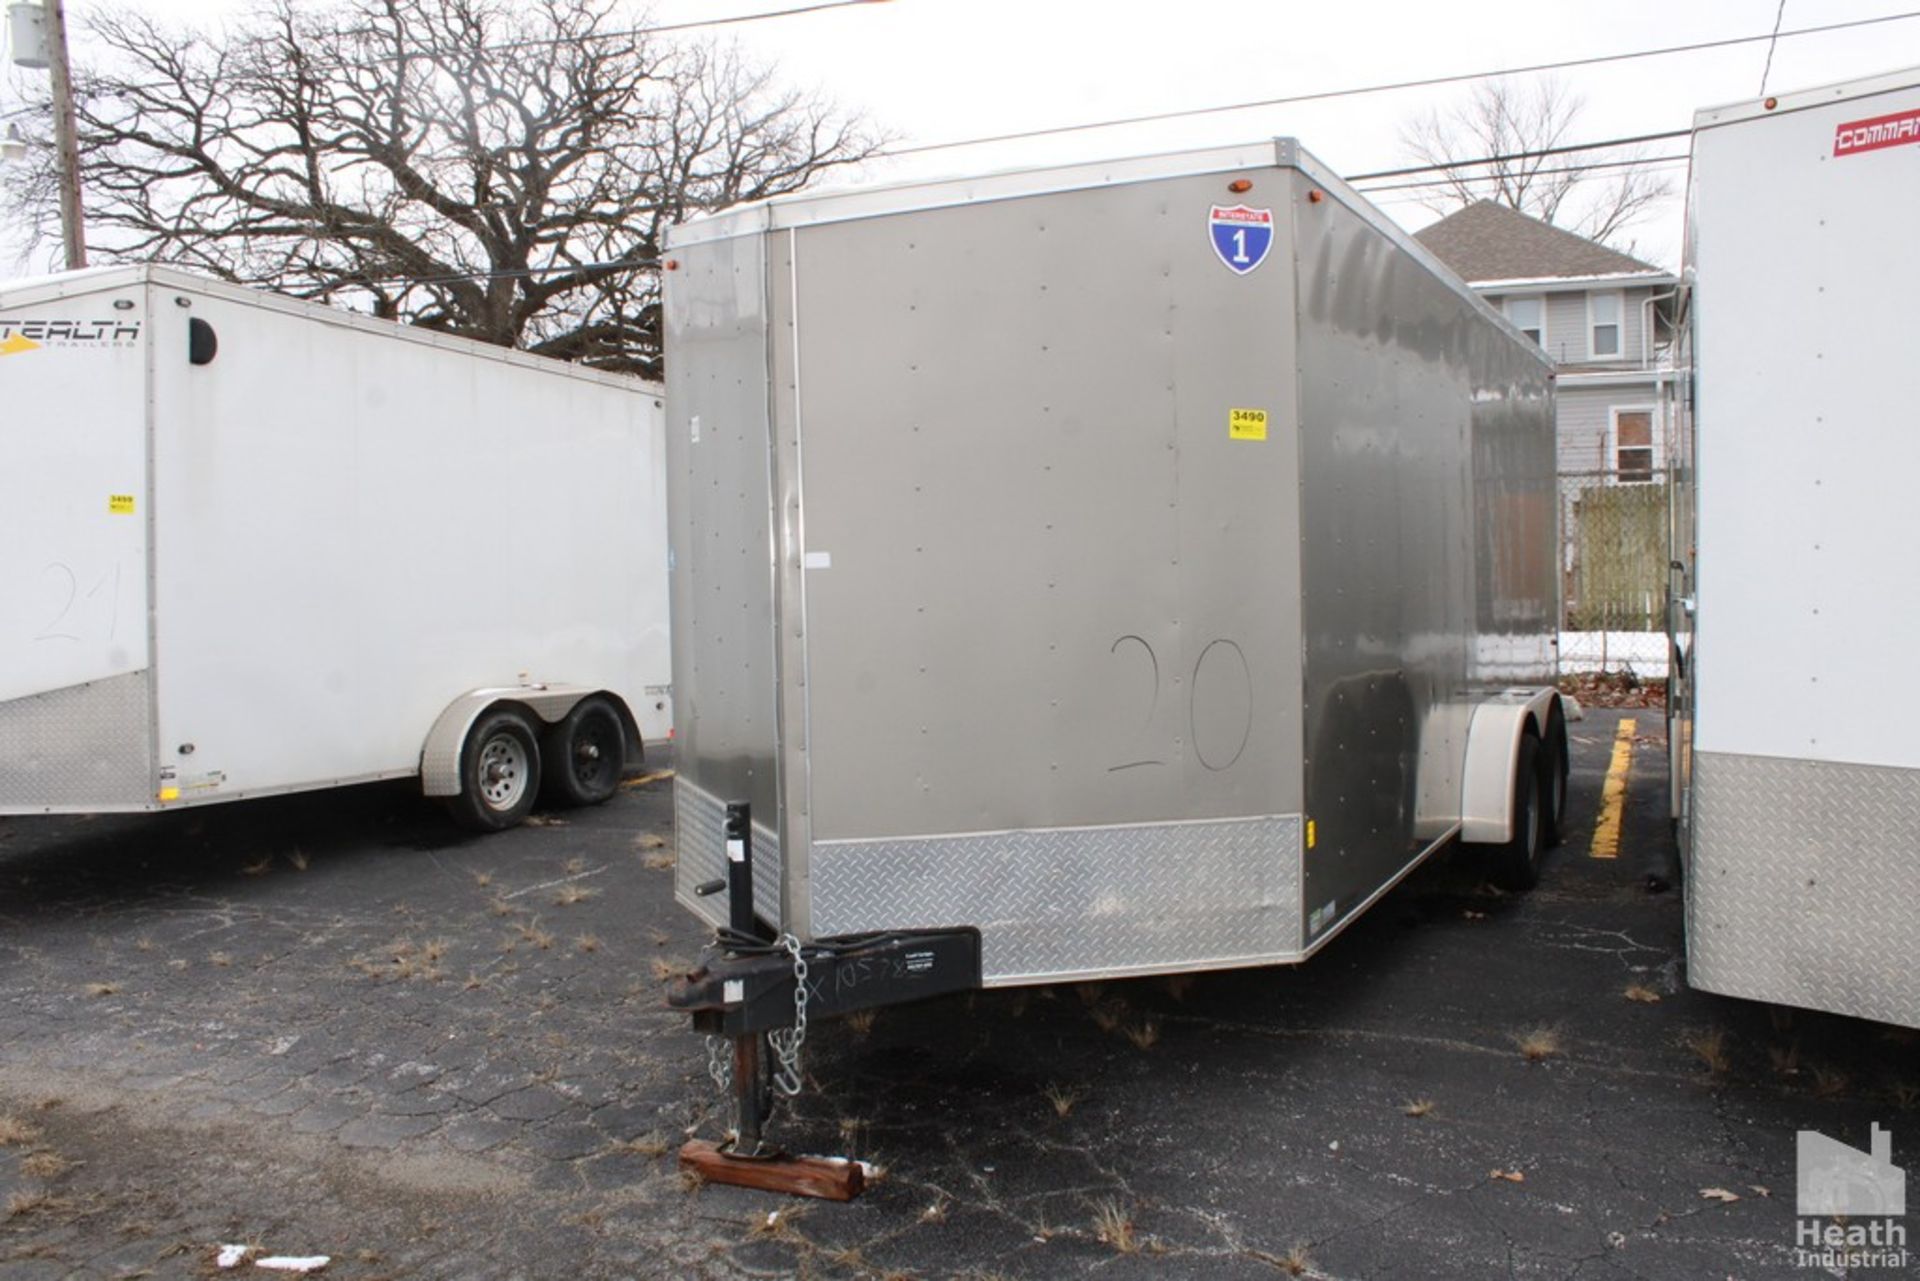 INTERSTATE MANUFACTURING 20’ ENCLOSED TRAILER, VIN: 1UK500H23N1105785 (NEW 2022), WITH SIDE DOOR,